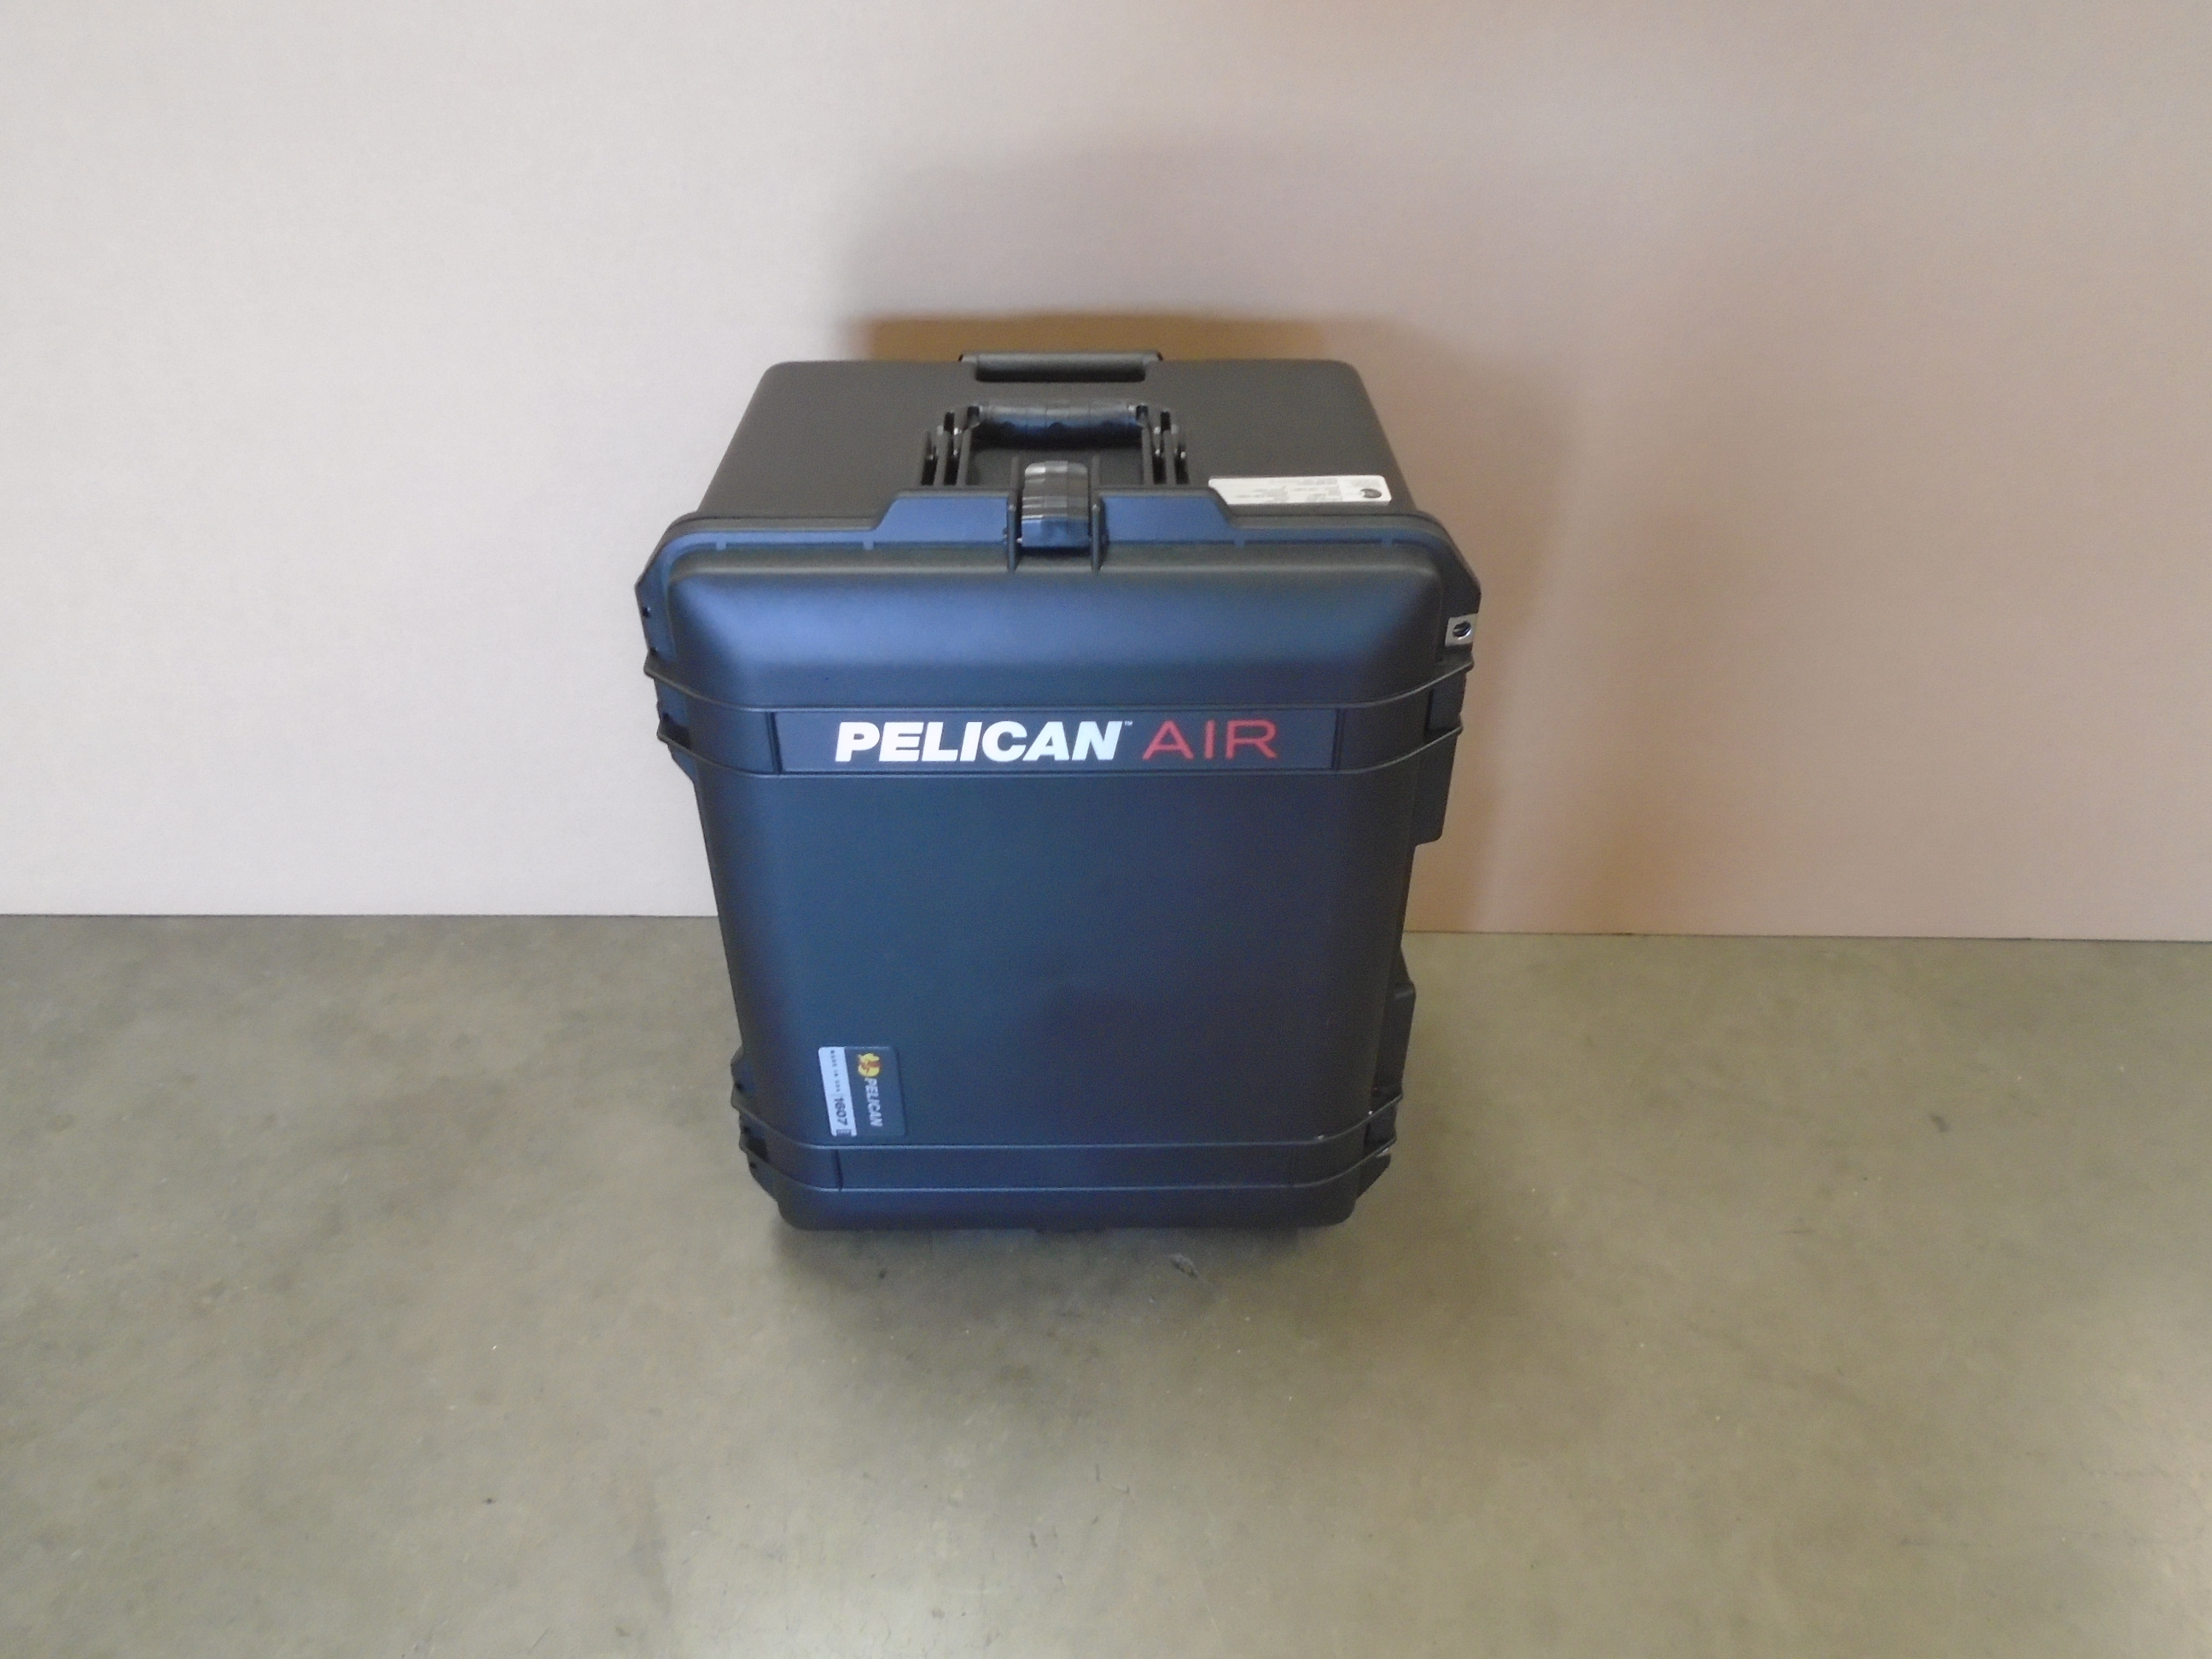 Print # 8339 - Pelican 1607 Air Retrofitted for Logitech Video Conference Kit By Nelson Case Corp